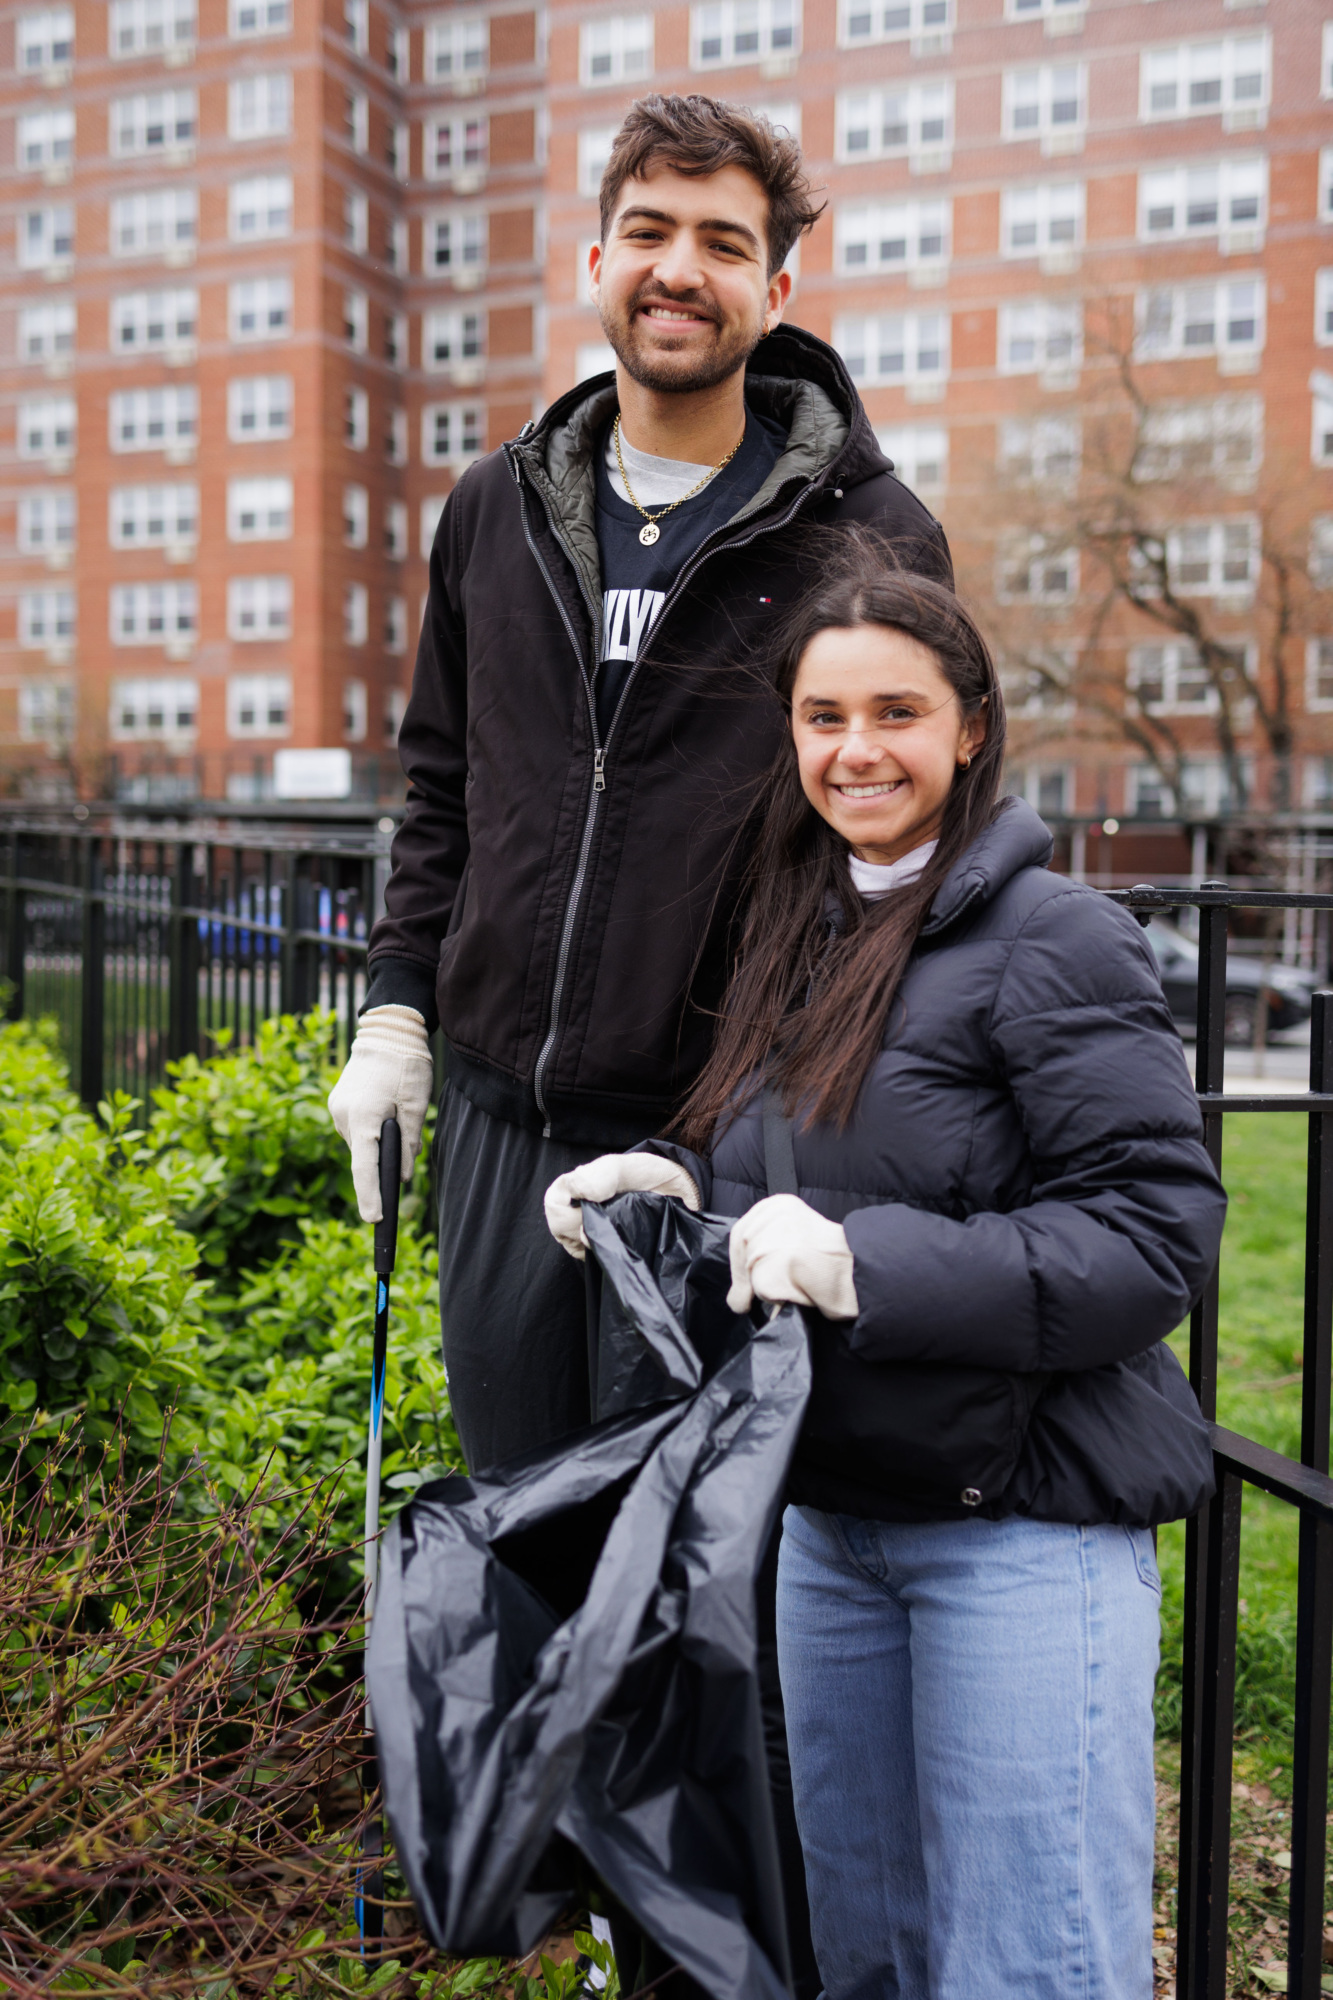 Two volunteers smiling at the camera while holding a trash bag during a community clean-up event in an urban park.